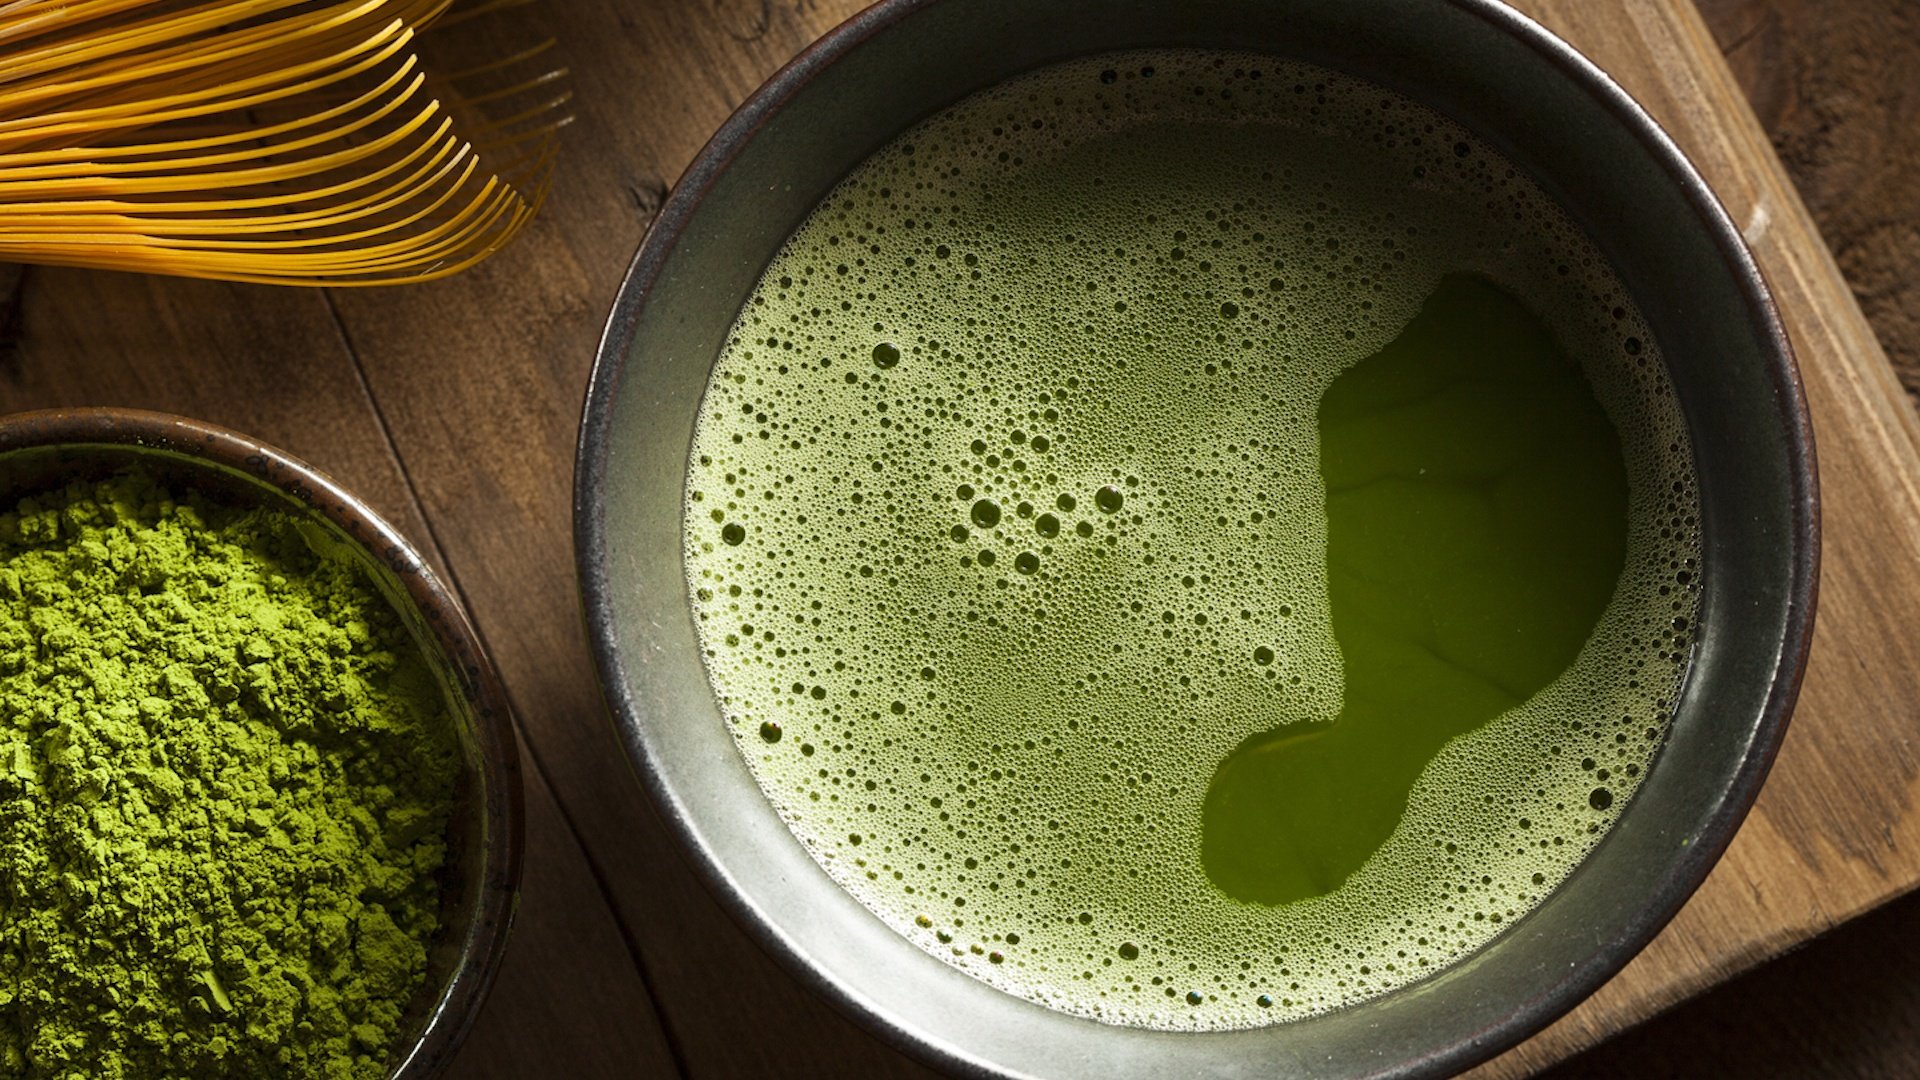 11 Health Benefits of Green Tea (+ How to Drink It for Maximum Benefits)